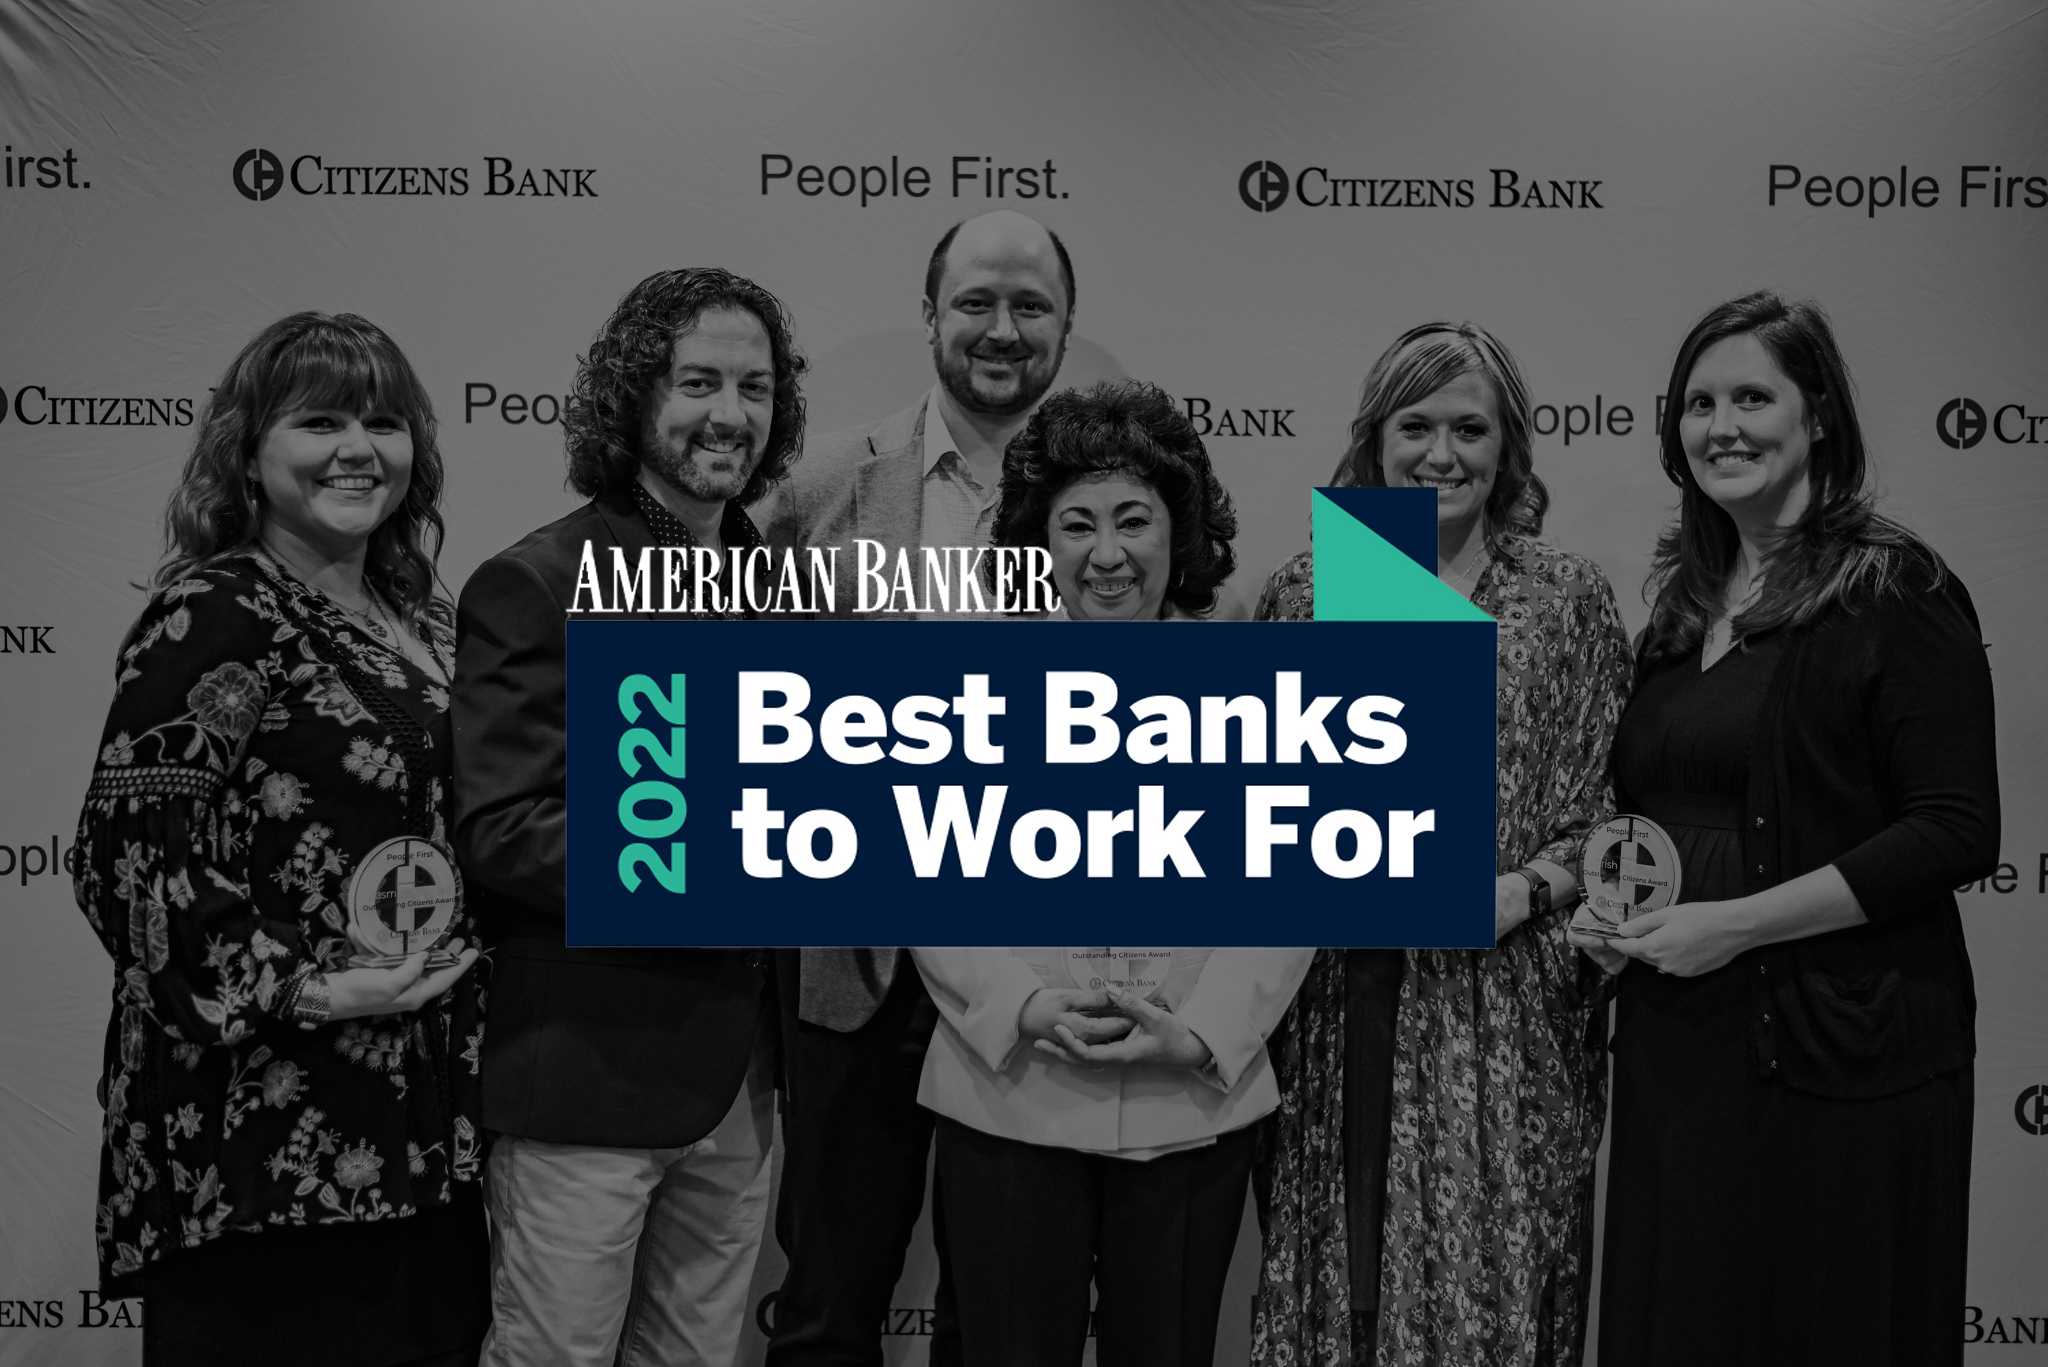 Citizens Bank Named 2022 "Best Banks to Work For" by American Banker